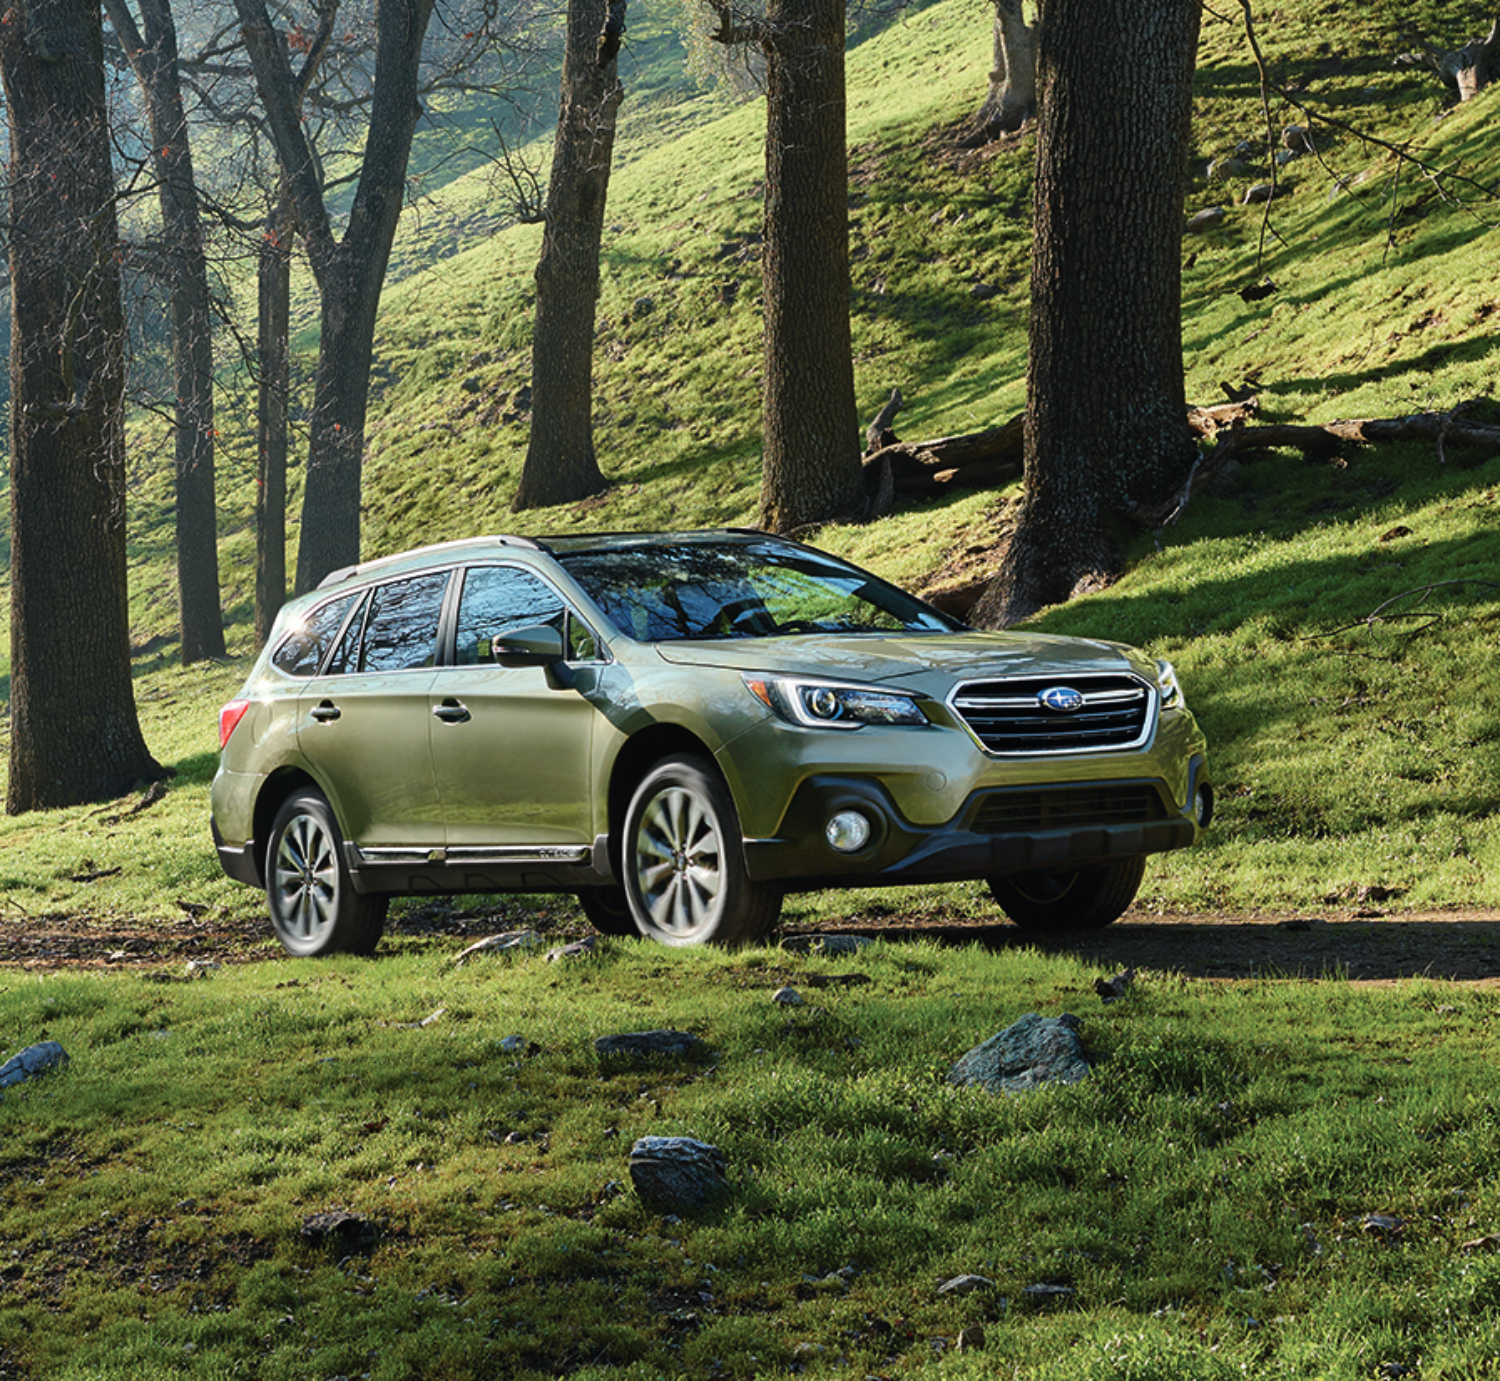 The best used Subaru Outback SUV years might surprise you. This 2019 sport utility vehicle is a good buy.